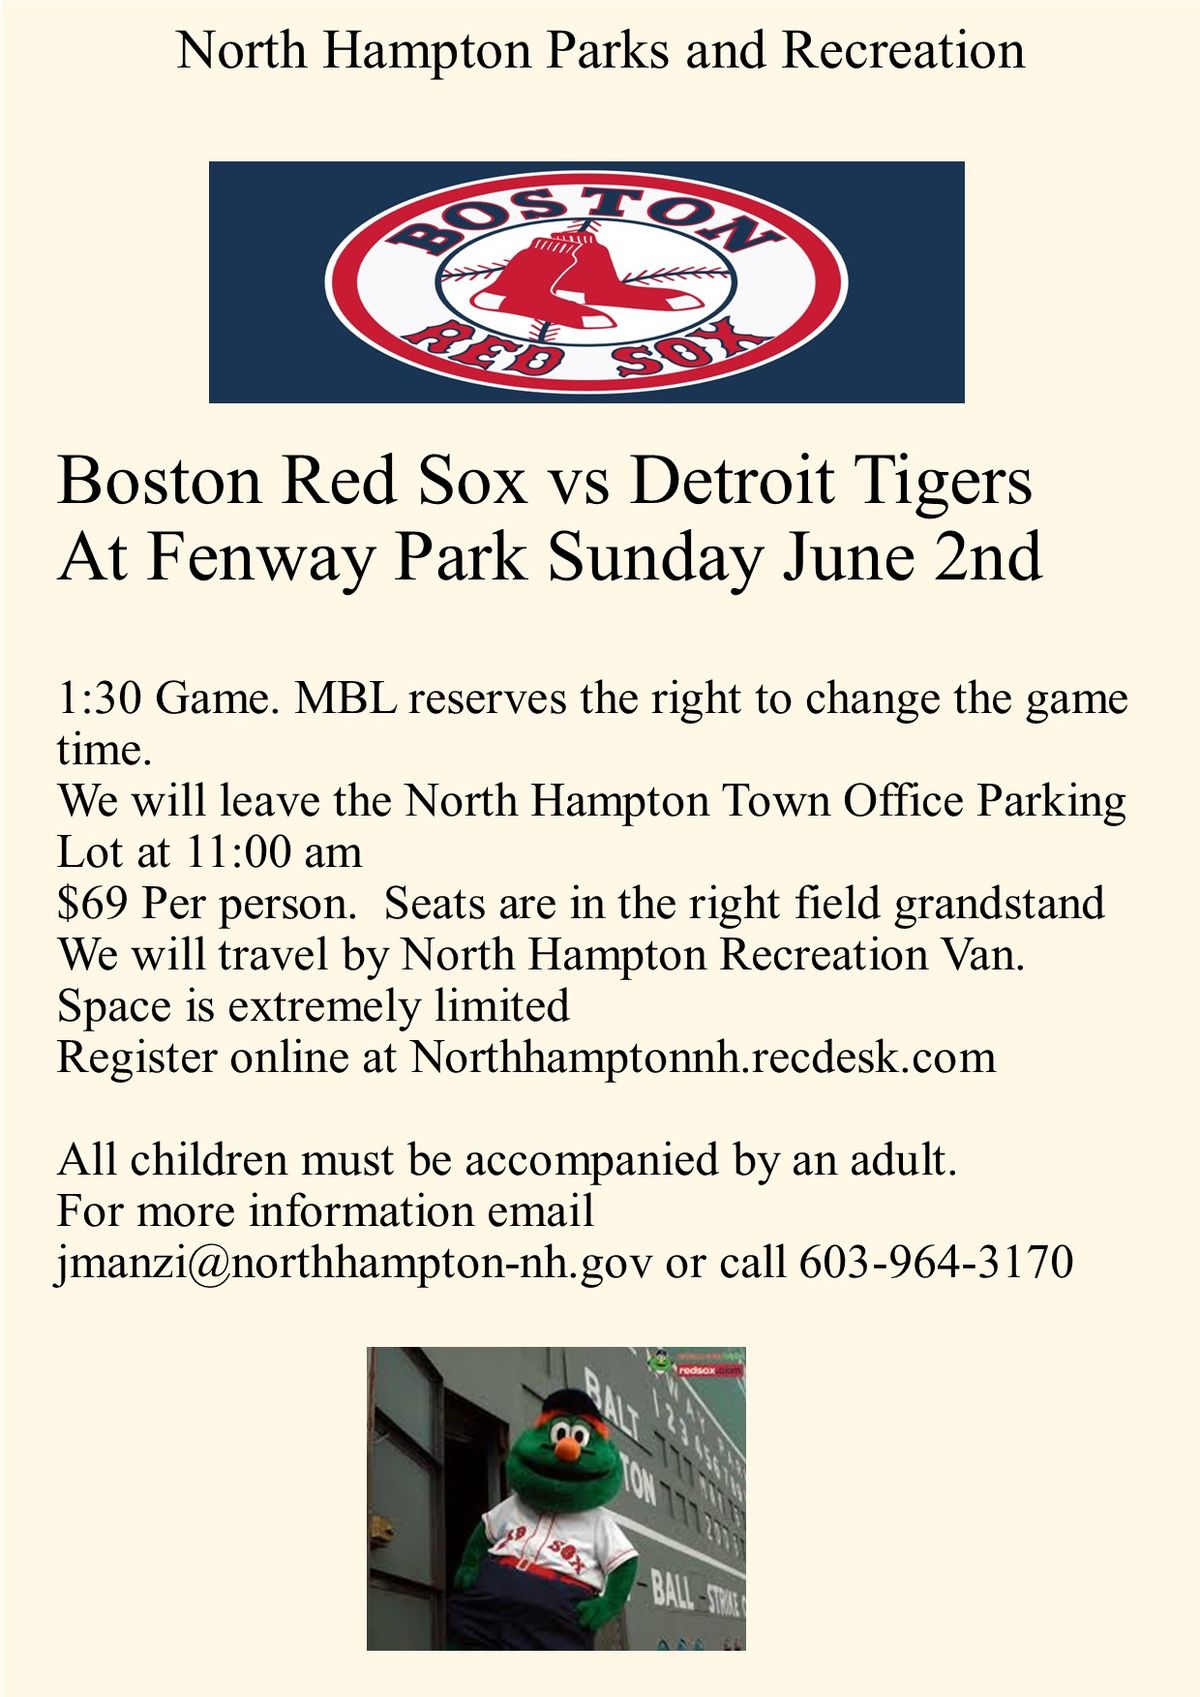 Boston Red Sox Trip with North Hampton Parks and Recreation